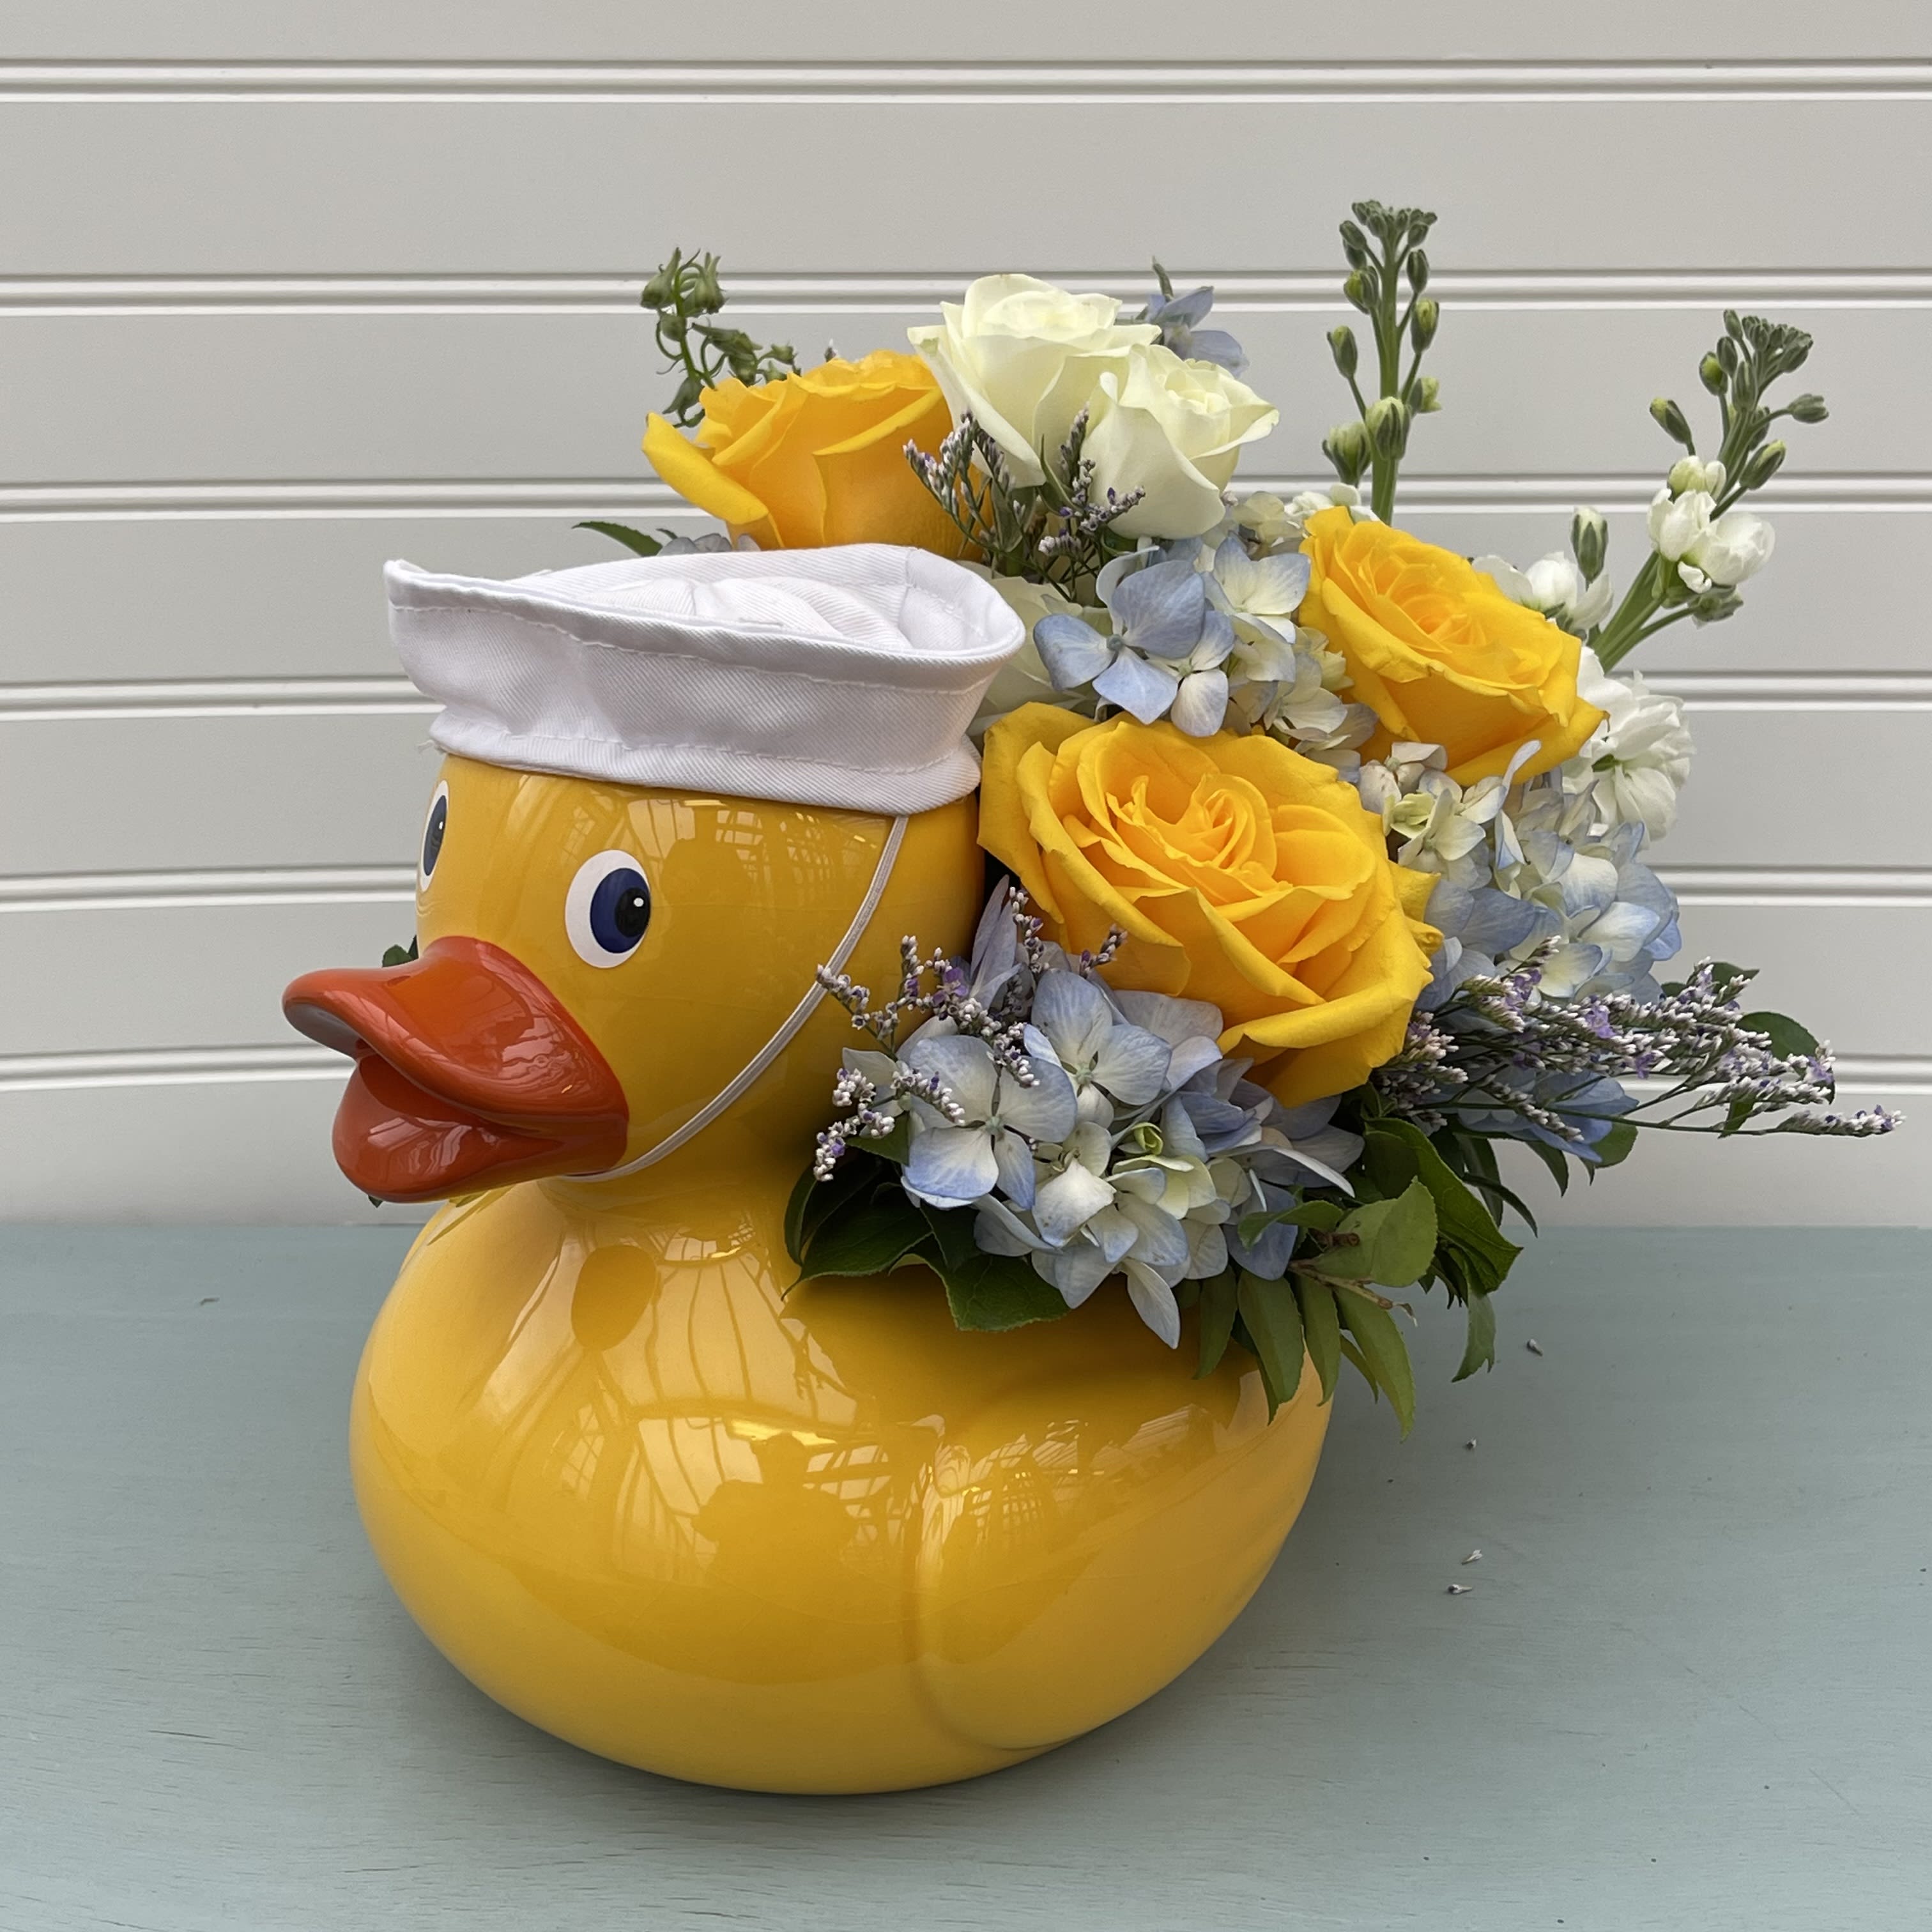 Donnie Ducky - Lucky duck! Make the new parents smile with this charming ceramic duck that mom will want to use later in the nursery.